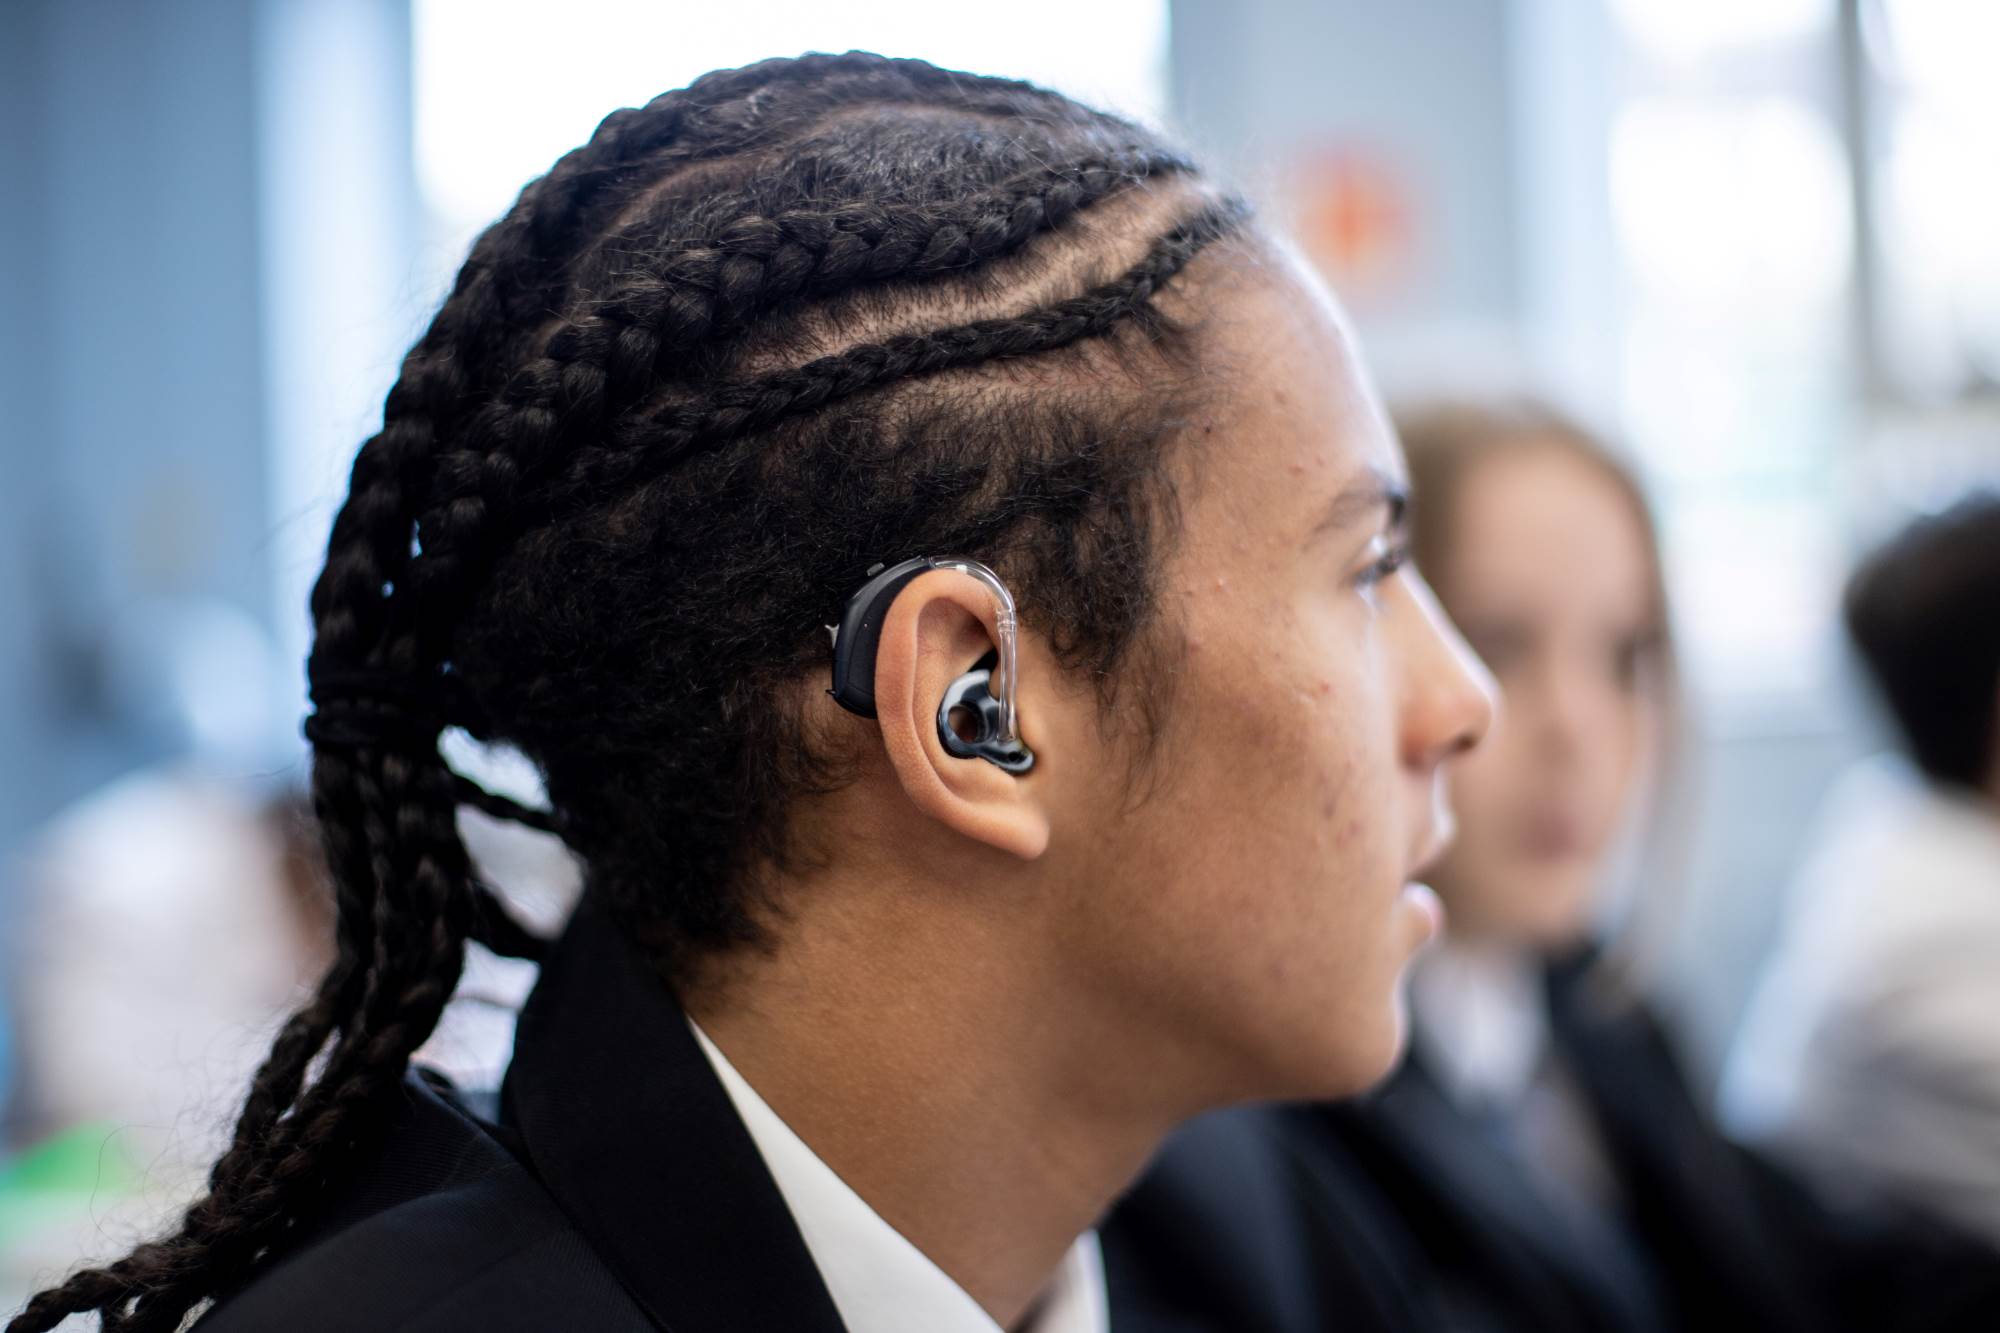 Young Person Looking To The Side With A Hearing Aid